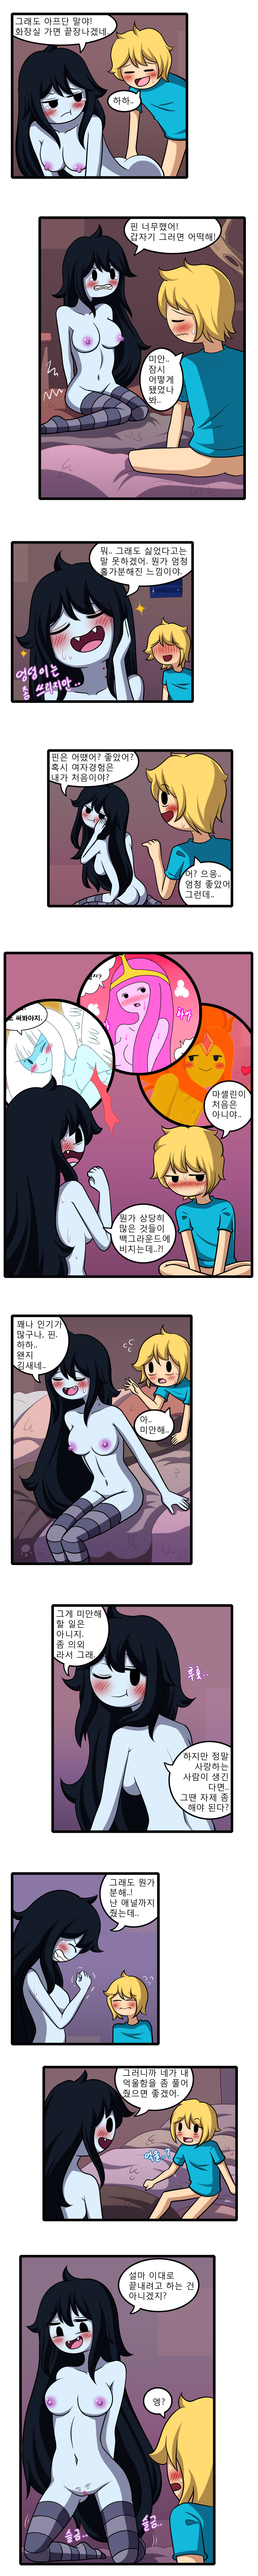 [WB] Adult Time 4 (Adventure Time) [Korean] 